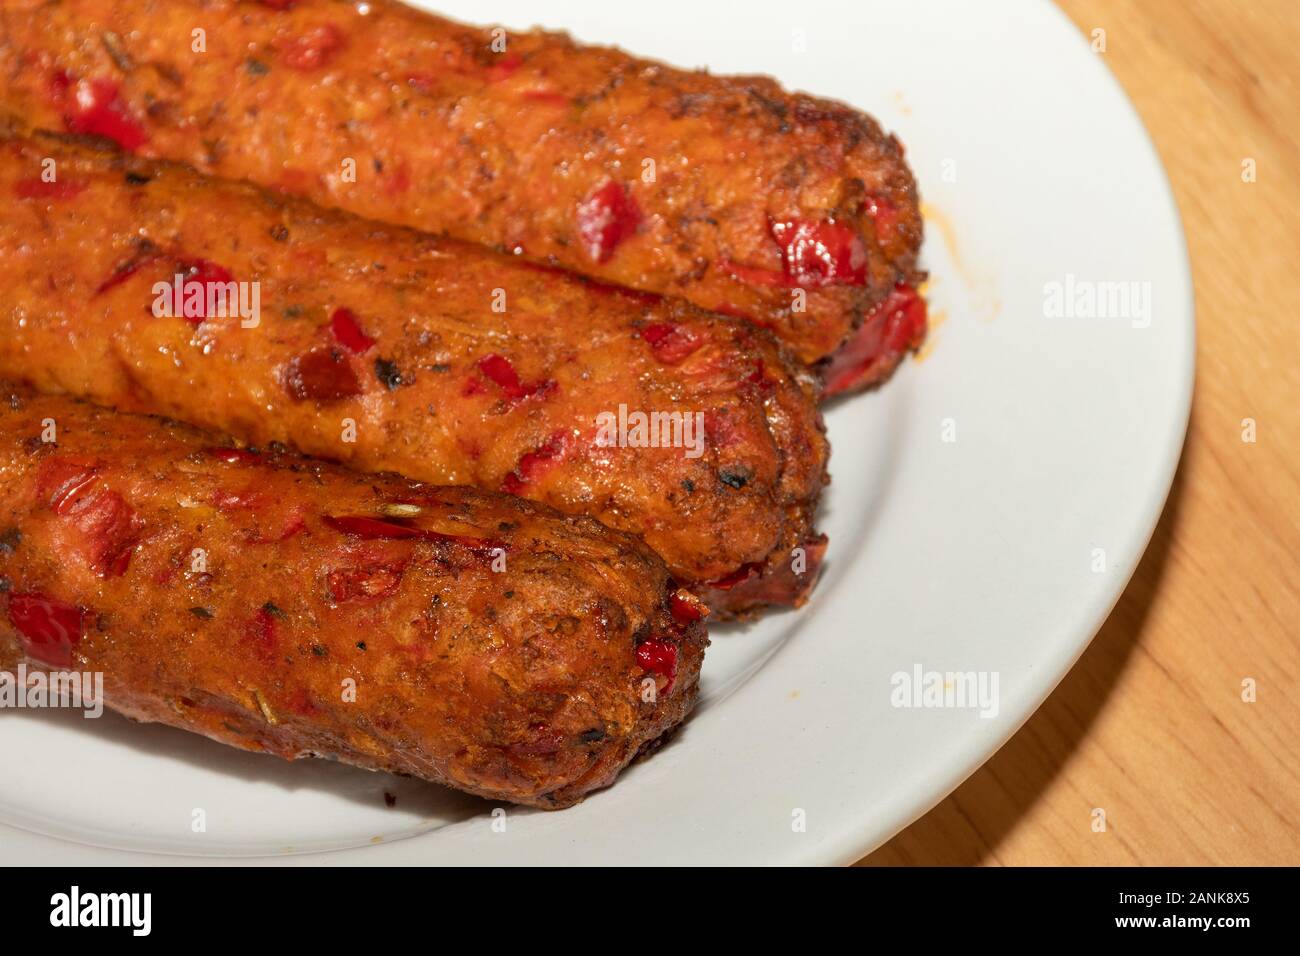 Vegetarian food - Linda McCartney's vegetarian chorizo and red pepper sausages on a plate Stock Photo